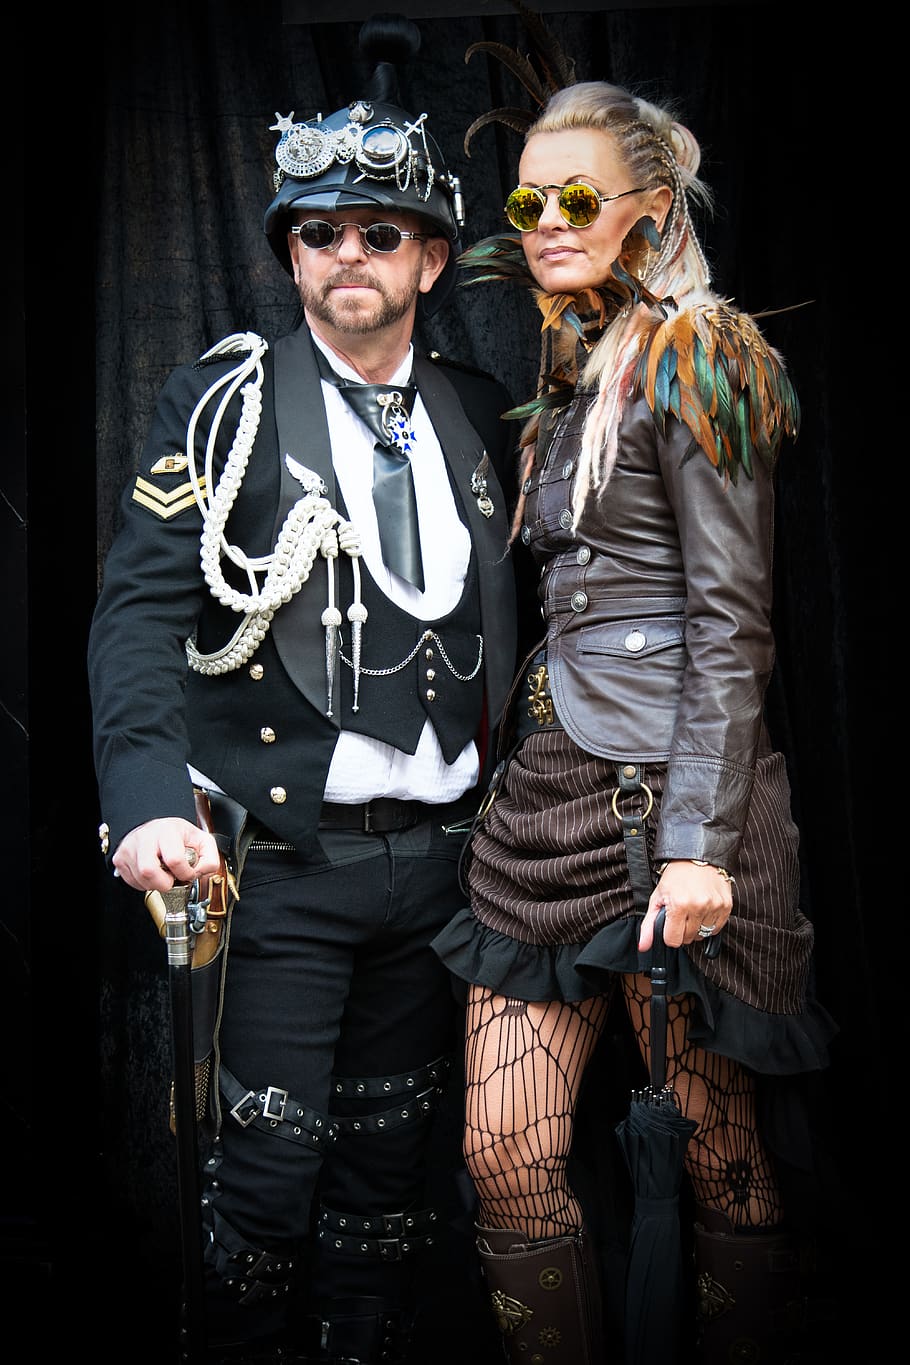 steampunk, gothic, goth, goth festival, whitby, couple, period costumes, cool, hat, goggles